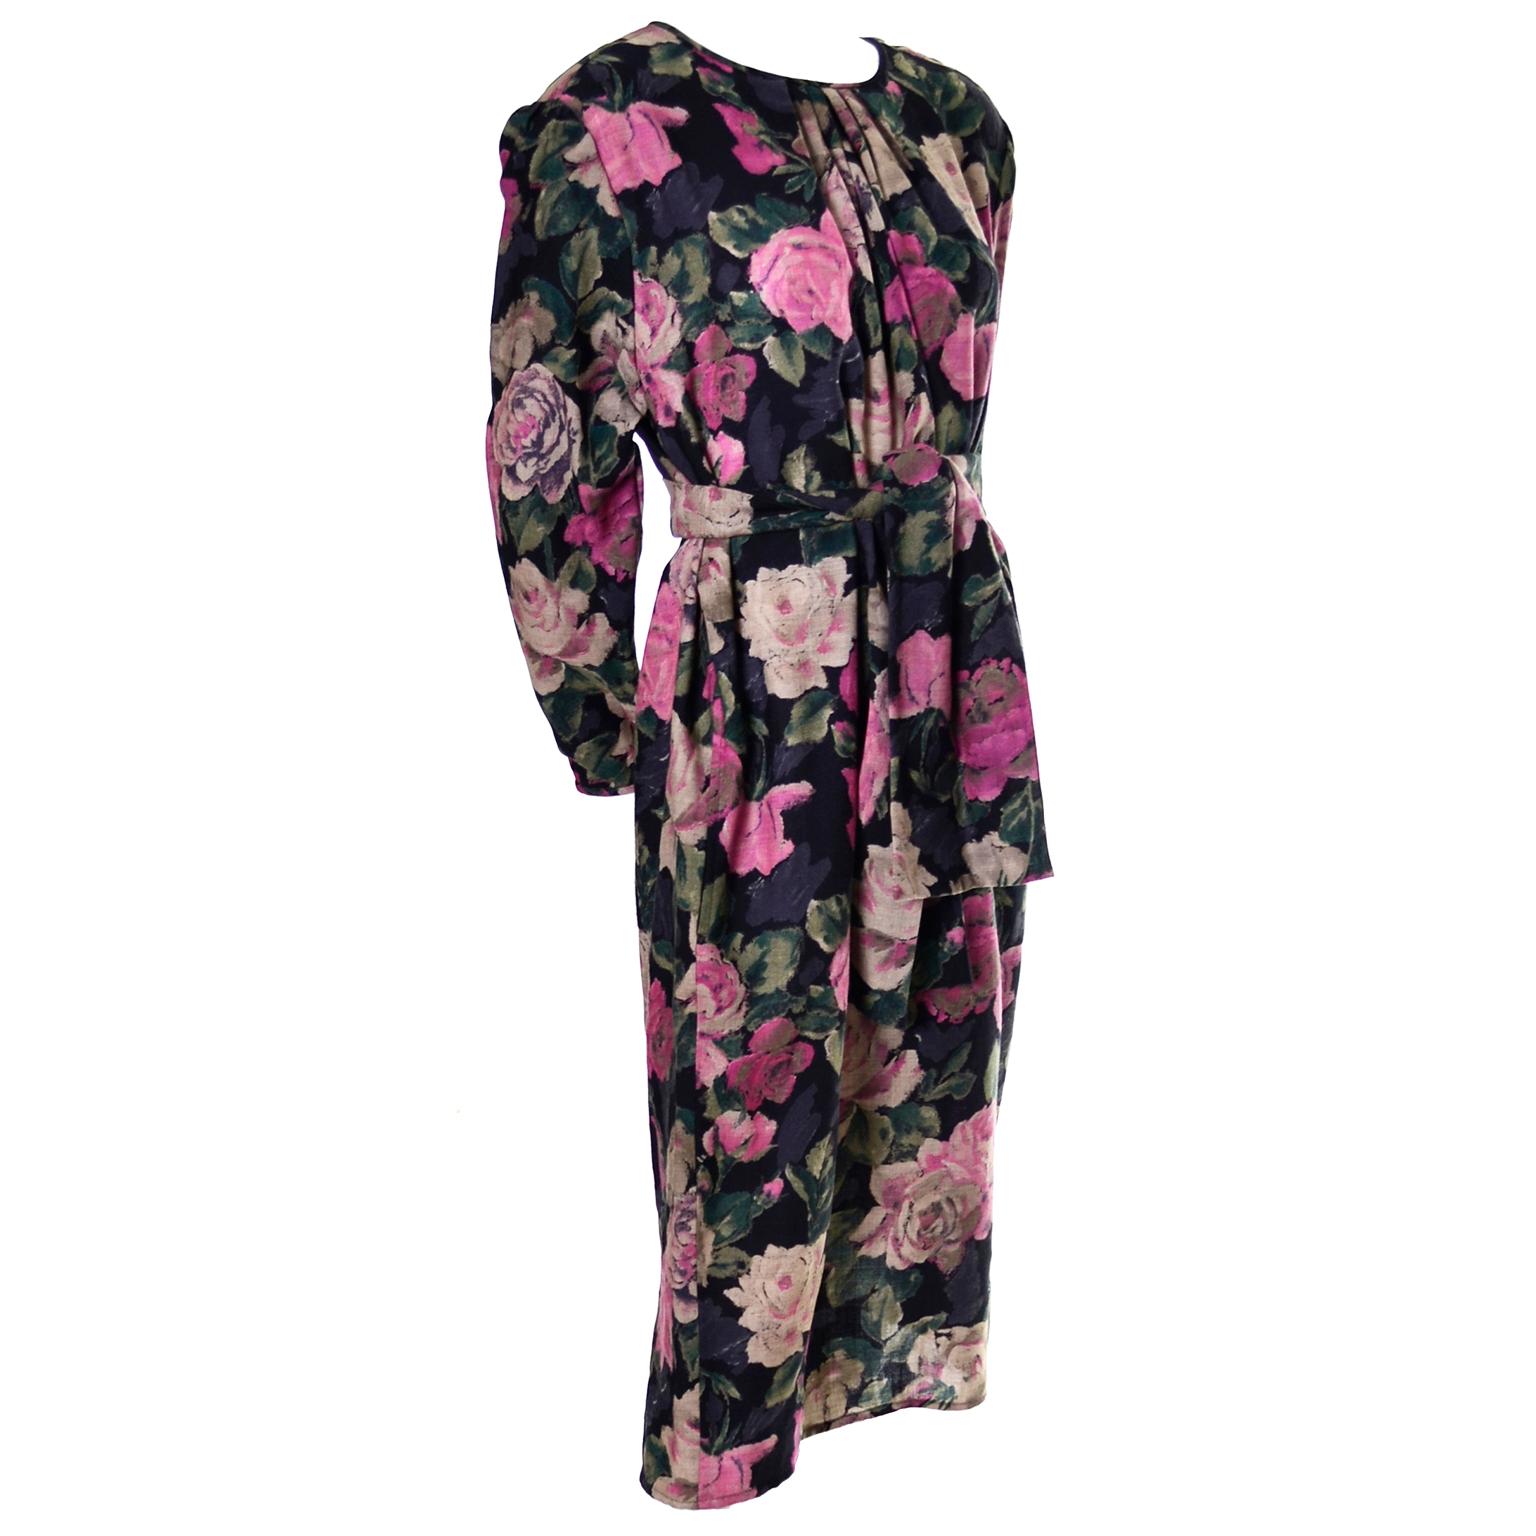 This great vintage late 1980's dress was designed by Emanuel Ungaro and bears the Ungaro Ter label. We love the gorgeous pink and cream floral print .This pretty vintage black Ungaro dress is made of 90% wool and 10% nylon and it has slight shoulder